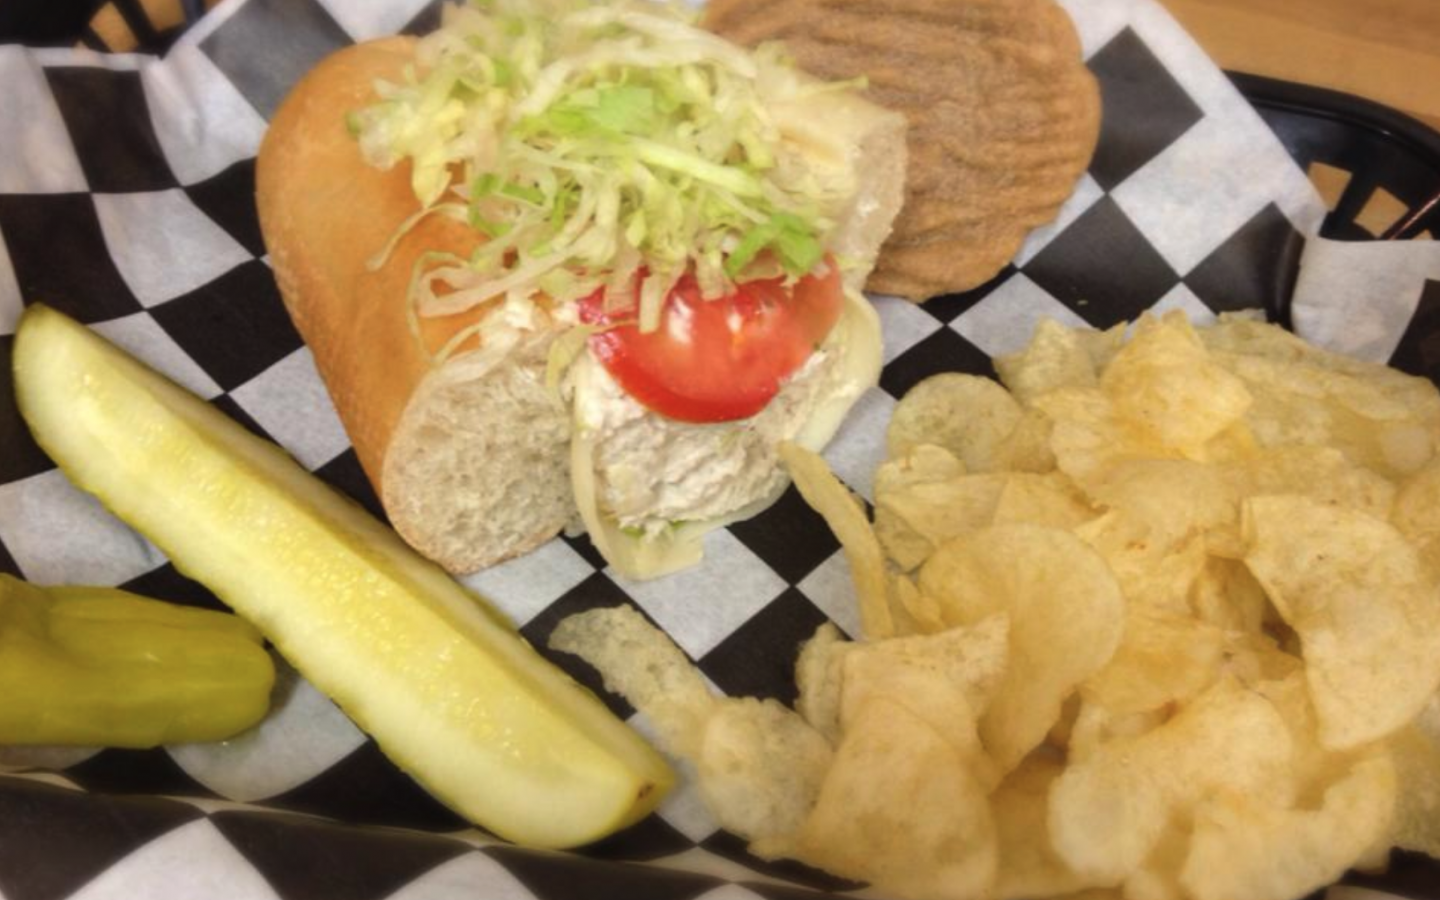 s Turkey sandwich with kosher pickle and potato chips